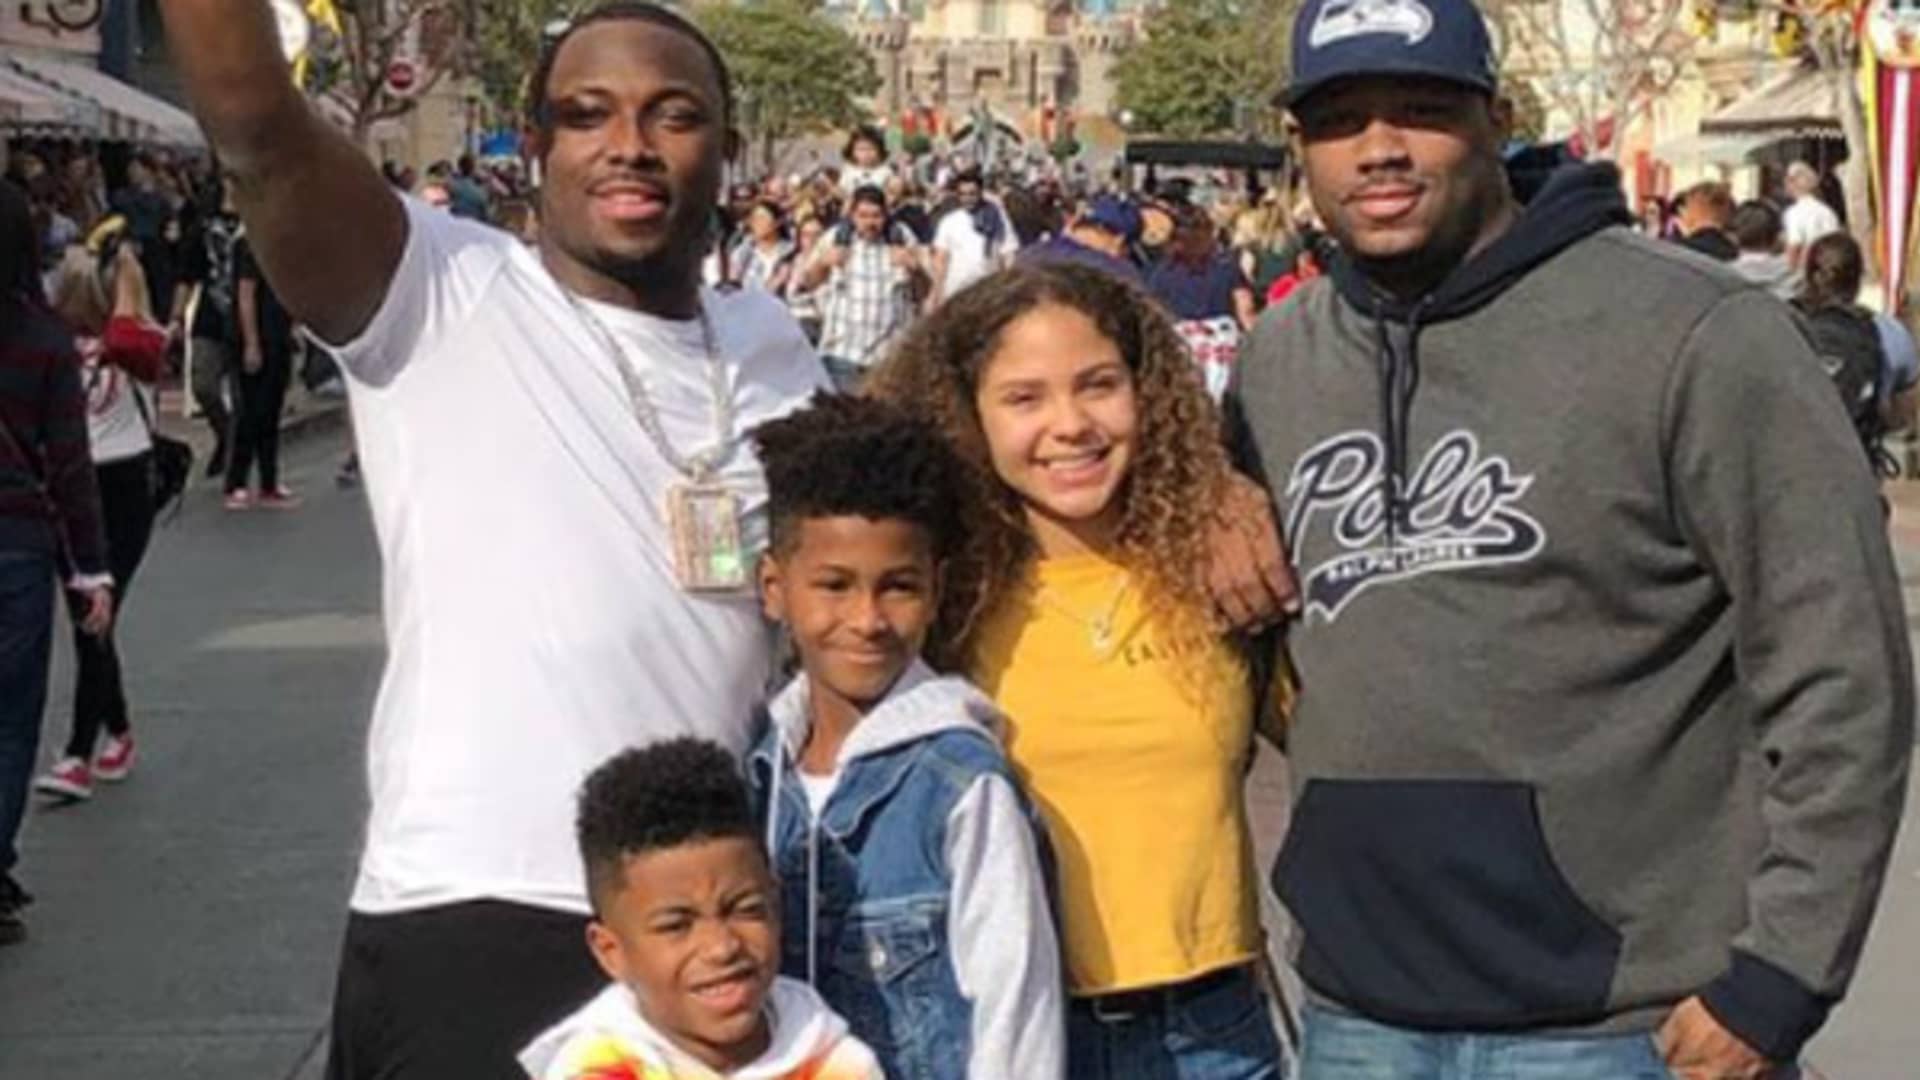 LeSean McCoy and his family (brother LeRon is right).